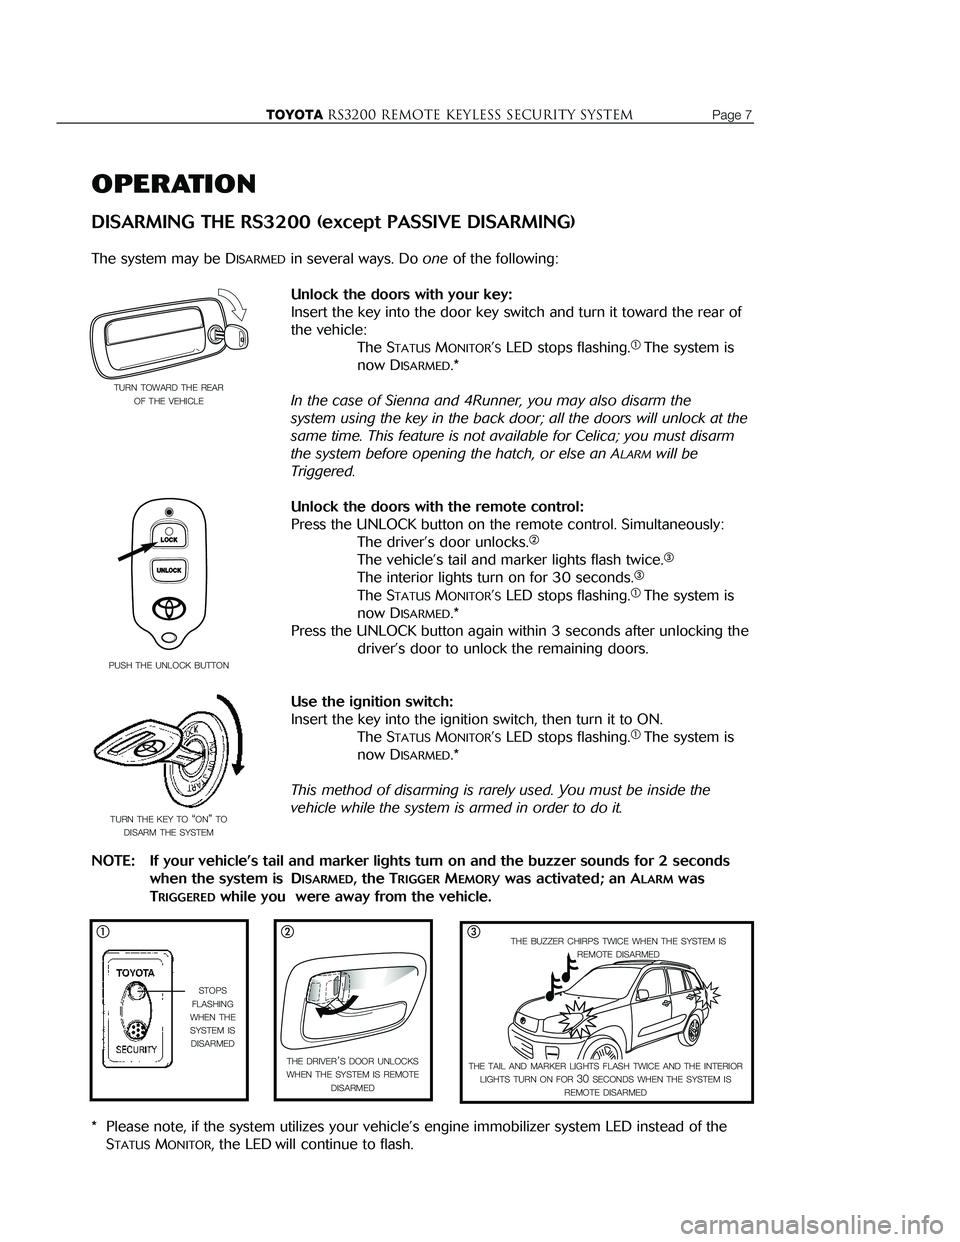 TOYOTA ECHO 2001  Accessories, Audio & Navigation (in English) Page 14                    TOYOTARS3200 REMOTE KEYLESS Security systemTOYOTARS3200 remote keyless Security systemPage 7
OPERATION
DISARMING THE RS3200 (except PASSIVE DISARMING)
The system may be DISA